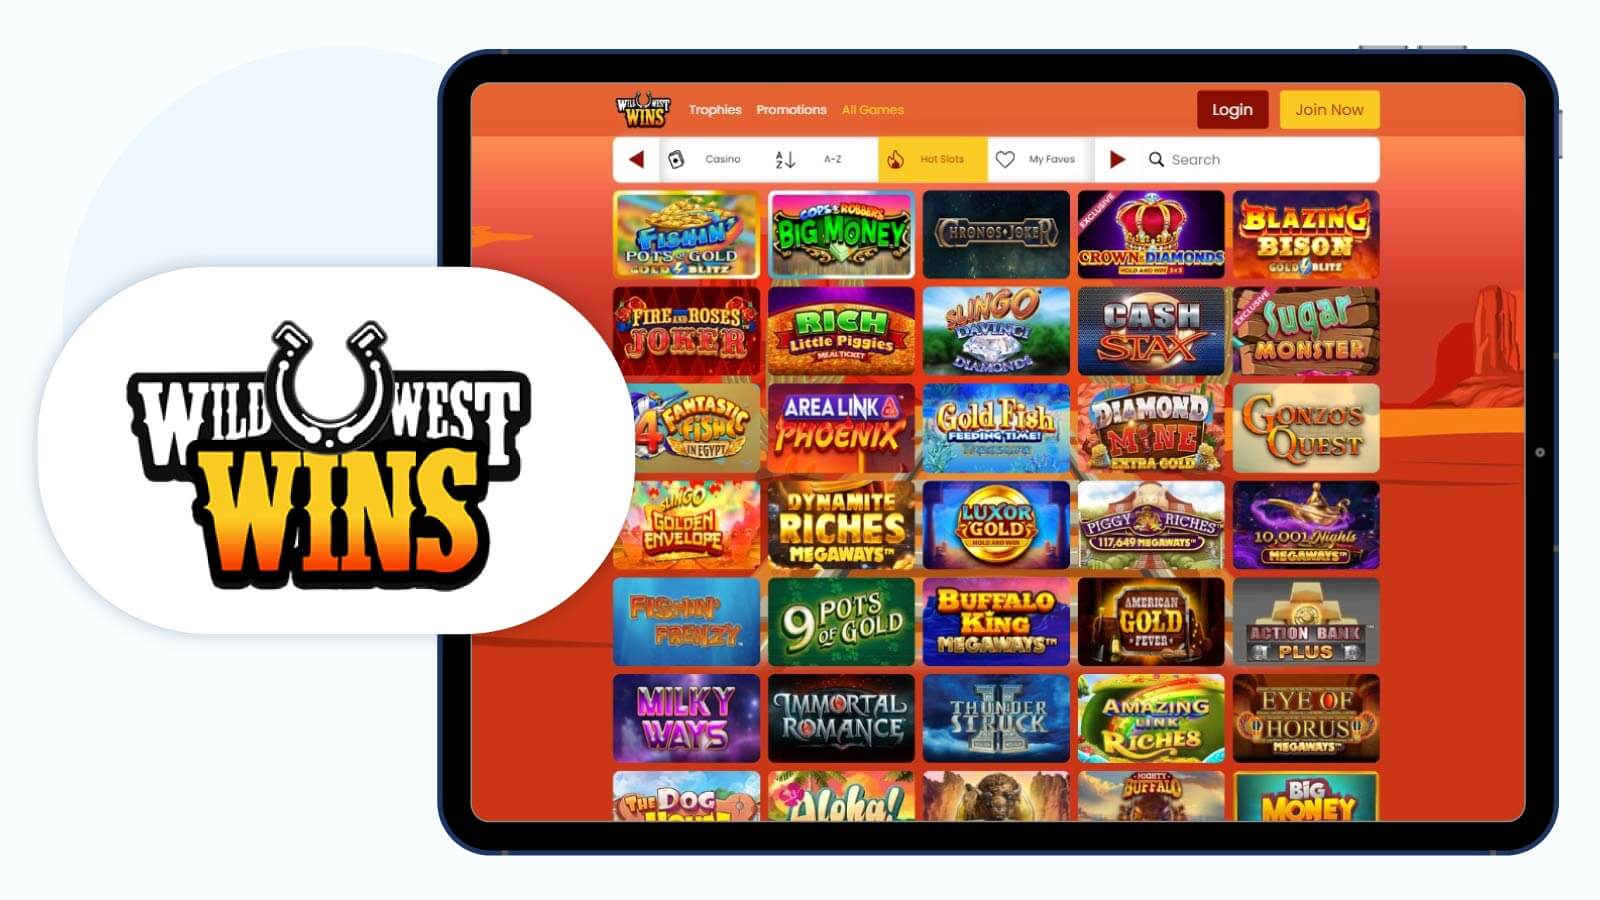 Wild West Wins Casino Outstanding RTG Casino with the Most Free Spins